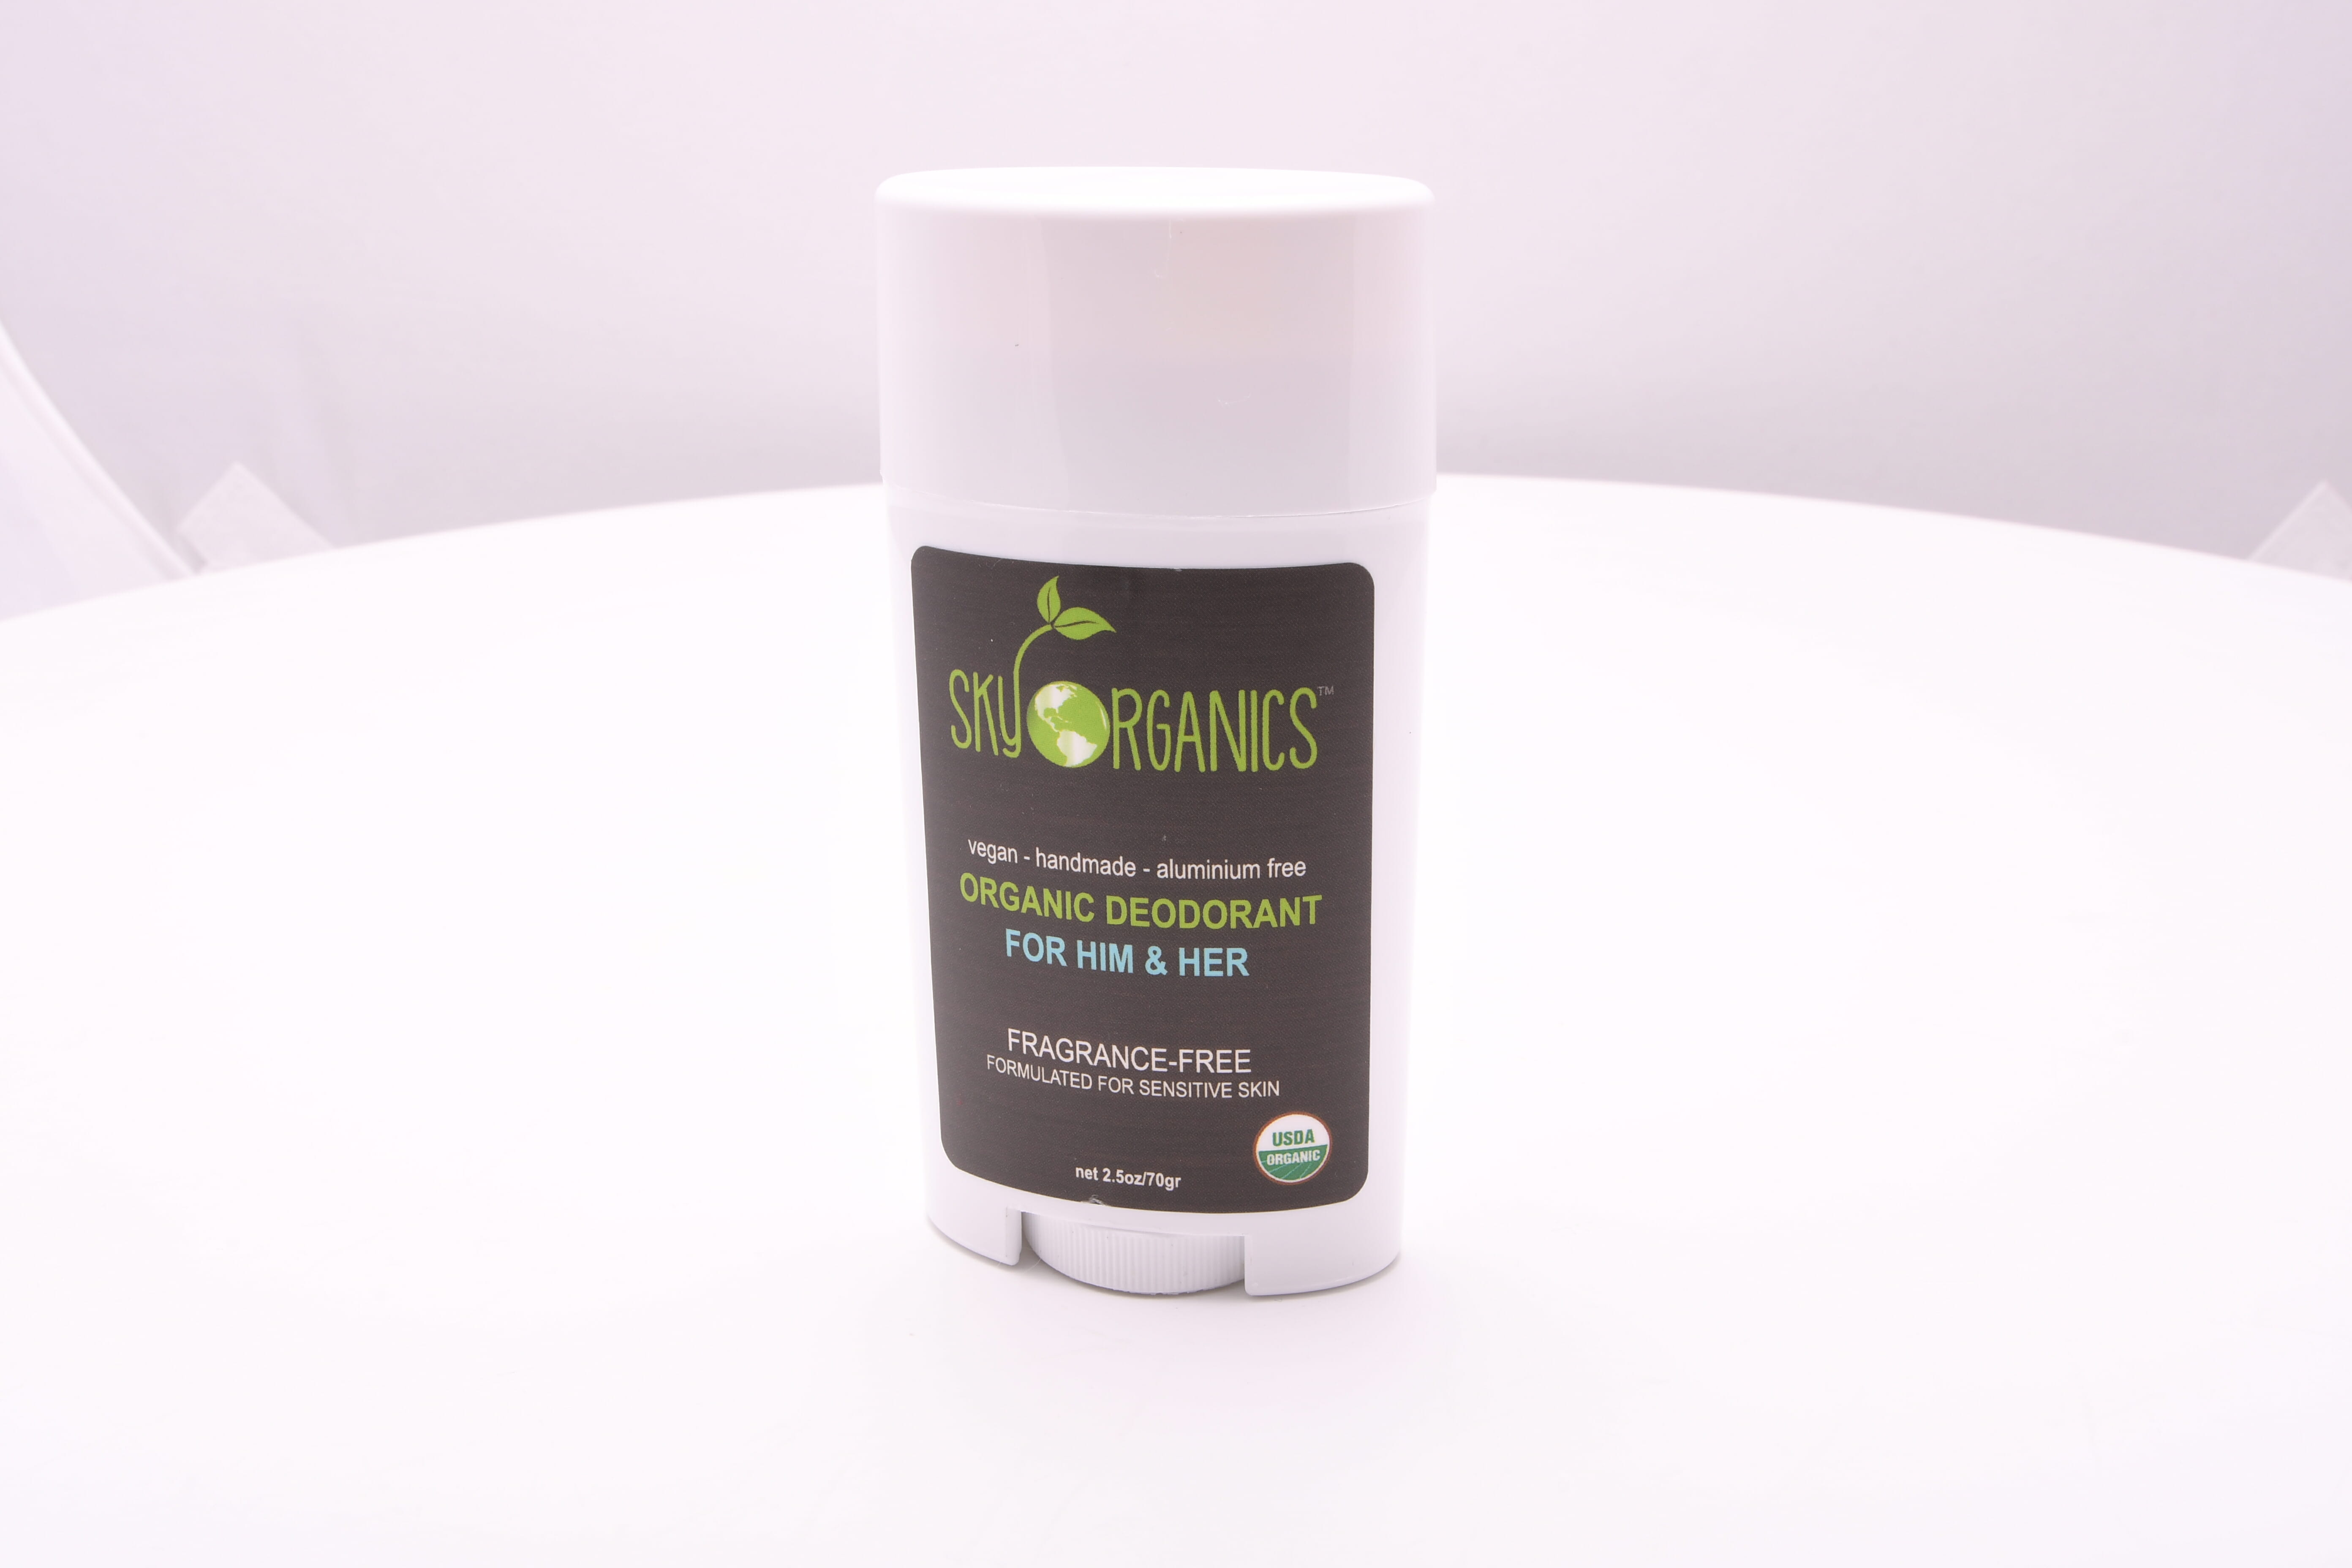 An example of a solid stick deodorant, marketed as "vegan" and "organic."